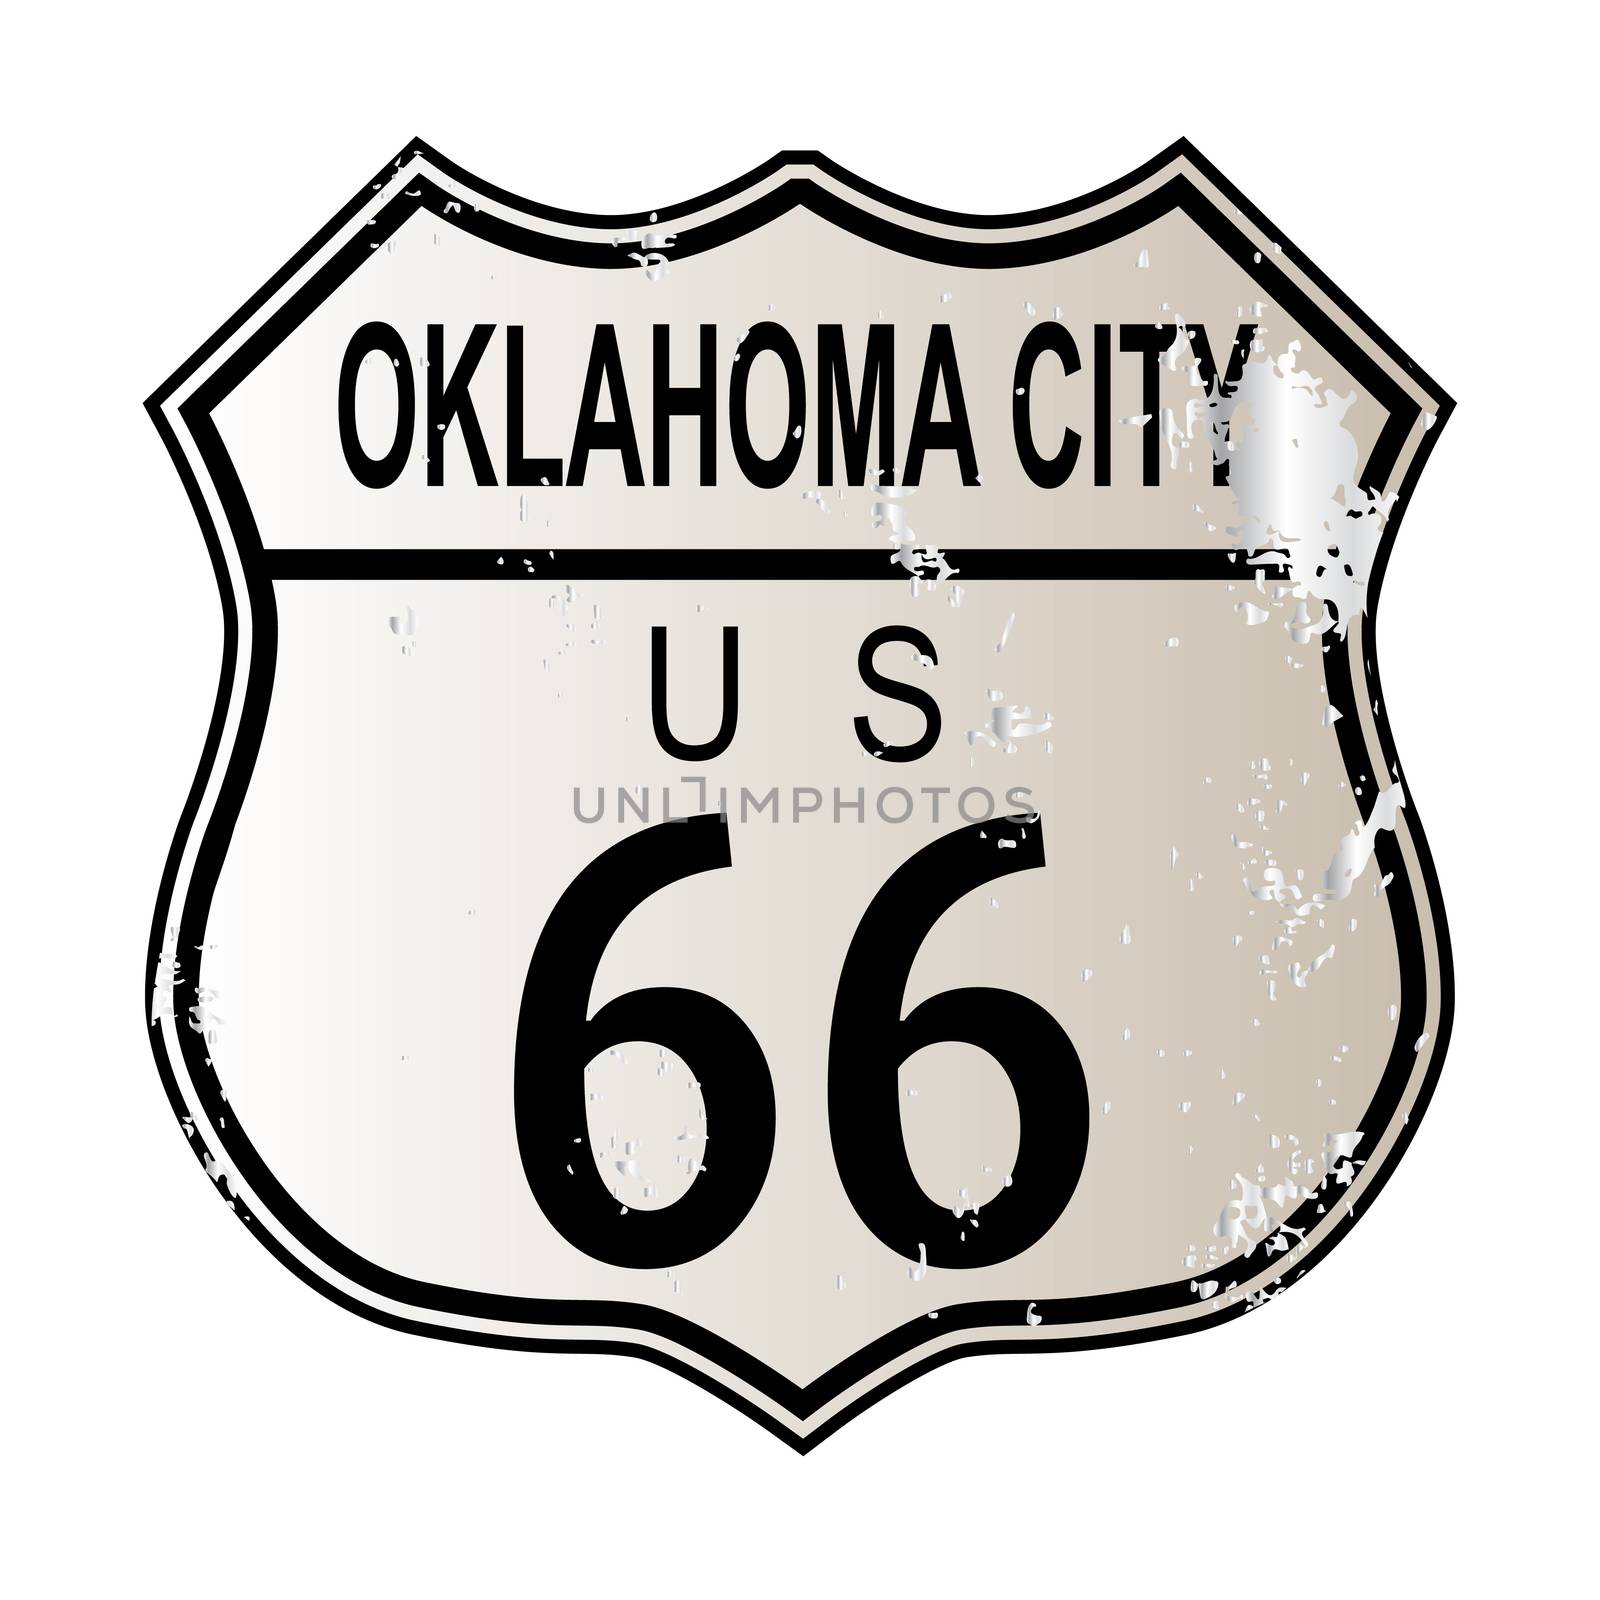 Oklahoma City Route 66 traffic sign over a white background and the legend ROUTE US 66